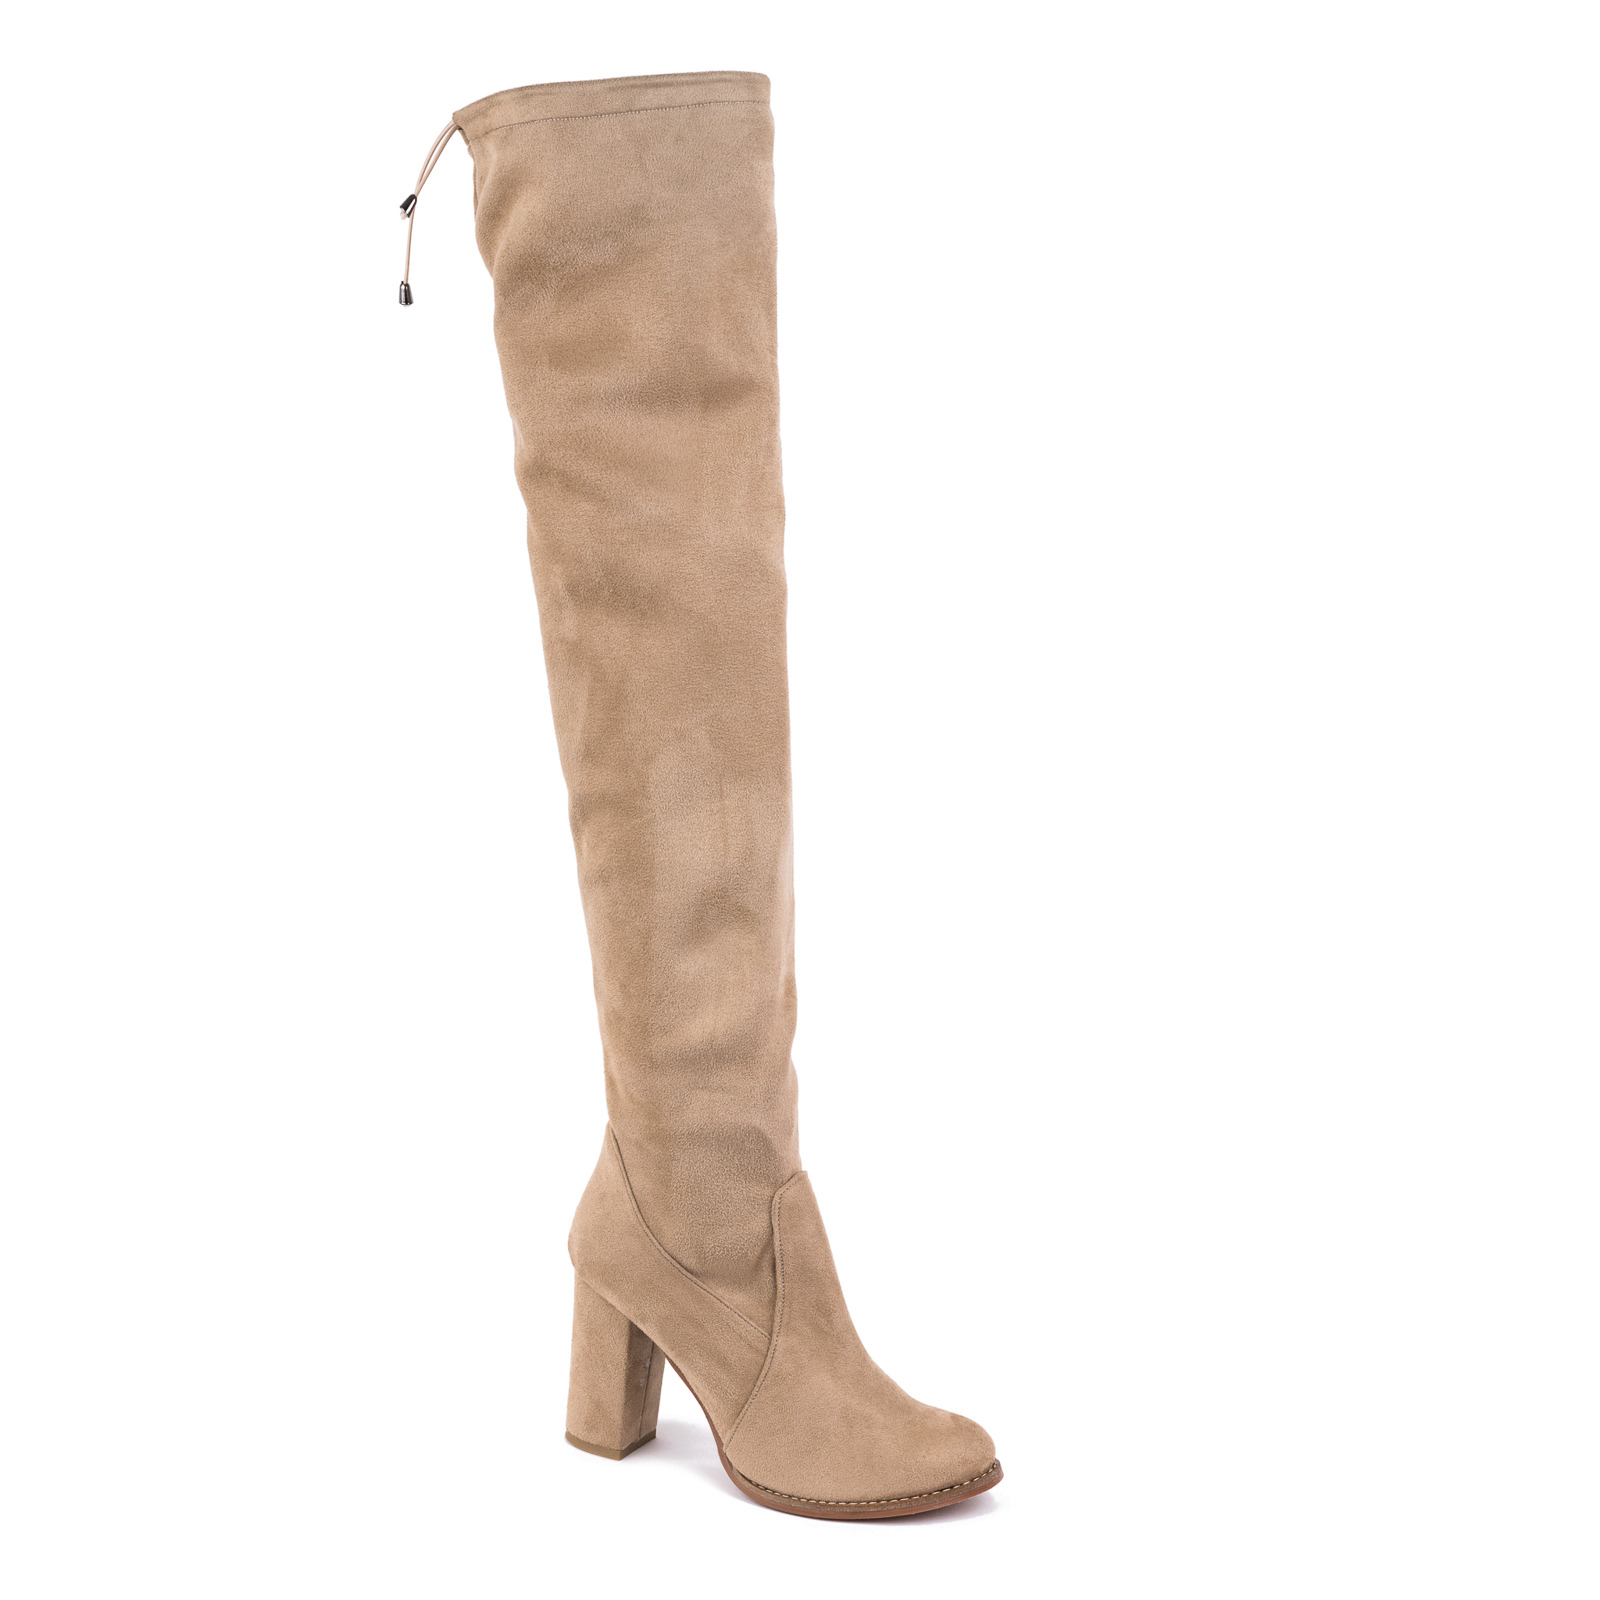 THIGH - HIGH BOOTS WITH CHUNKY HEEL - BEIGE